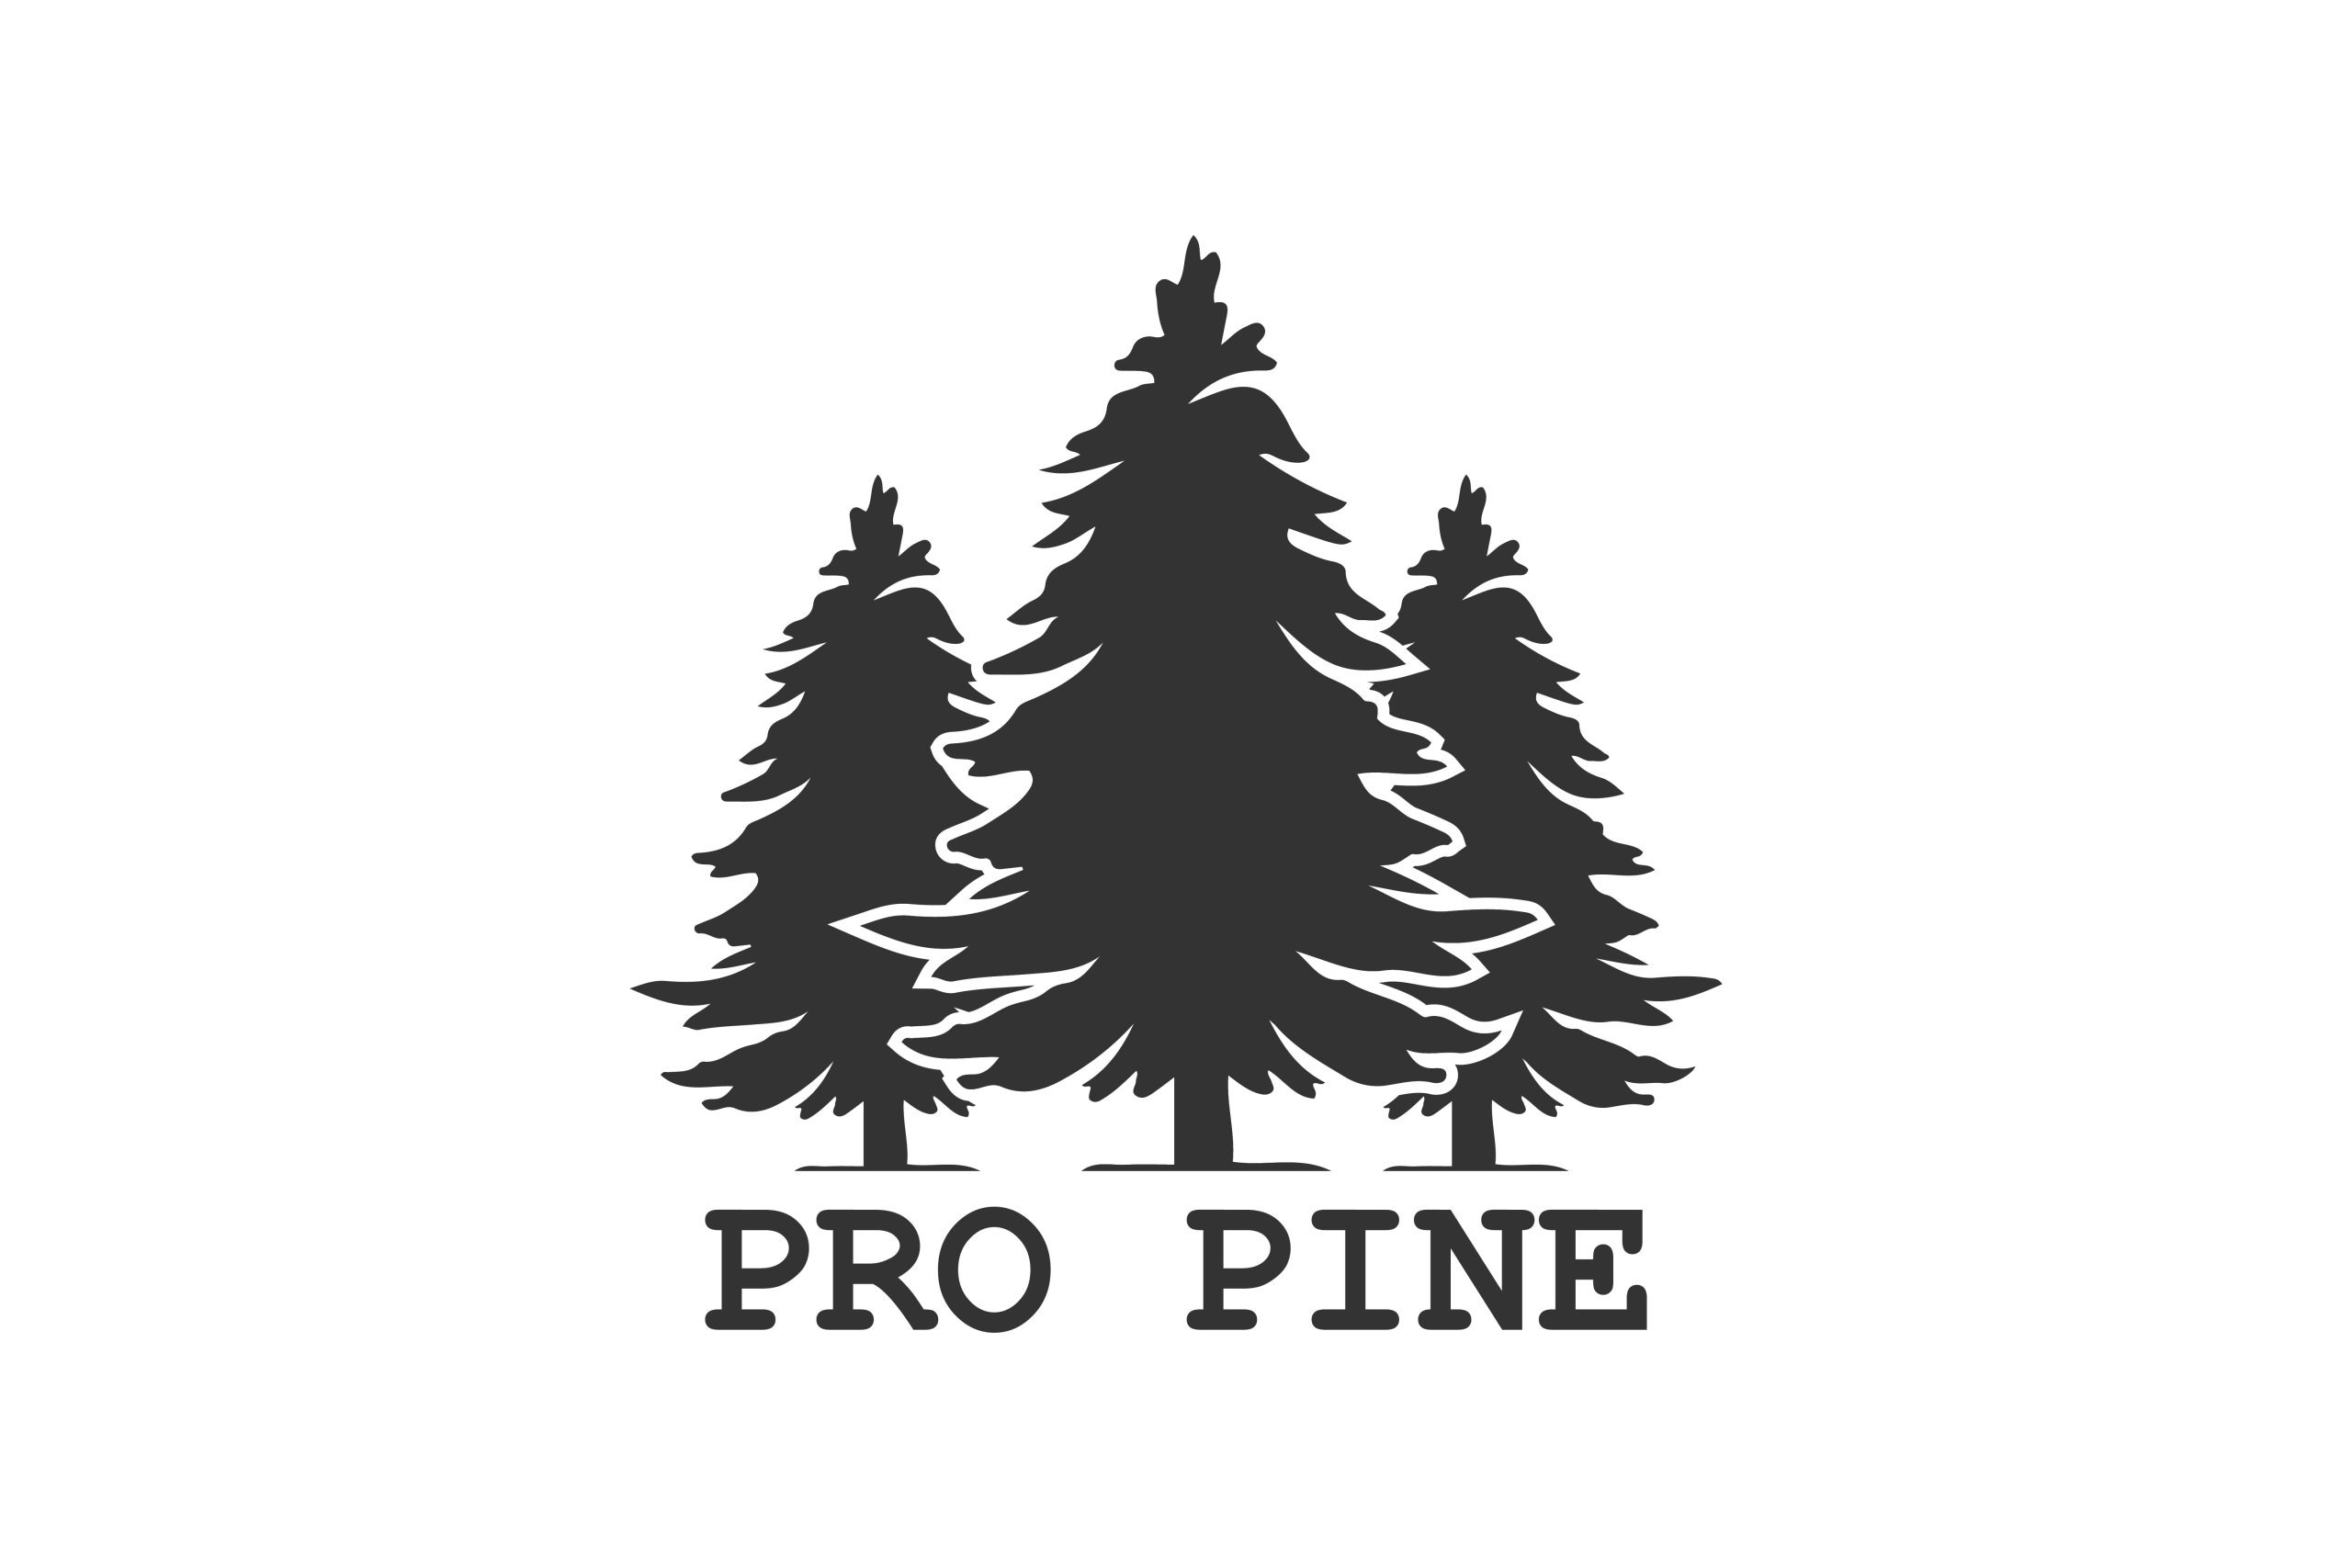 Download the free Pine Tree vector for your design projects.